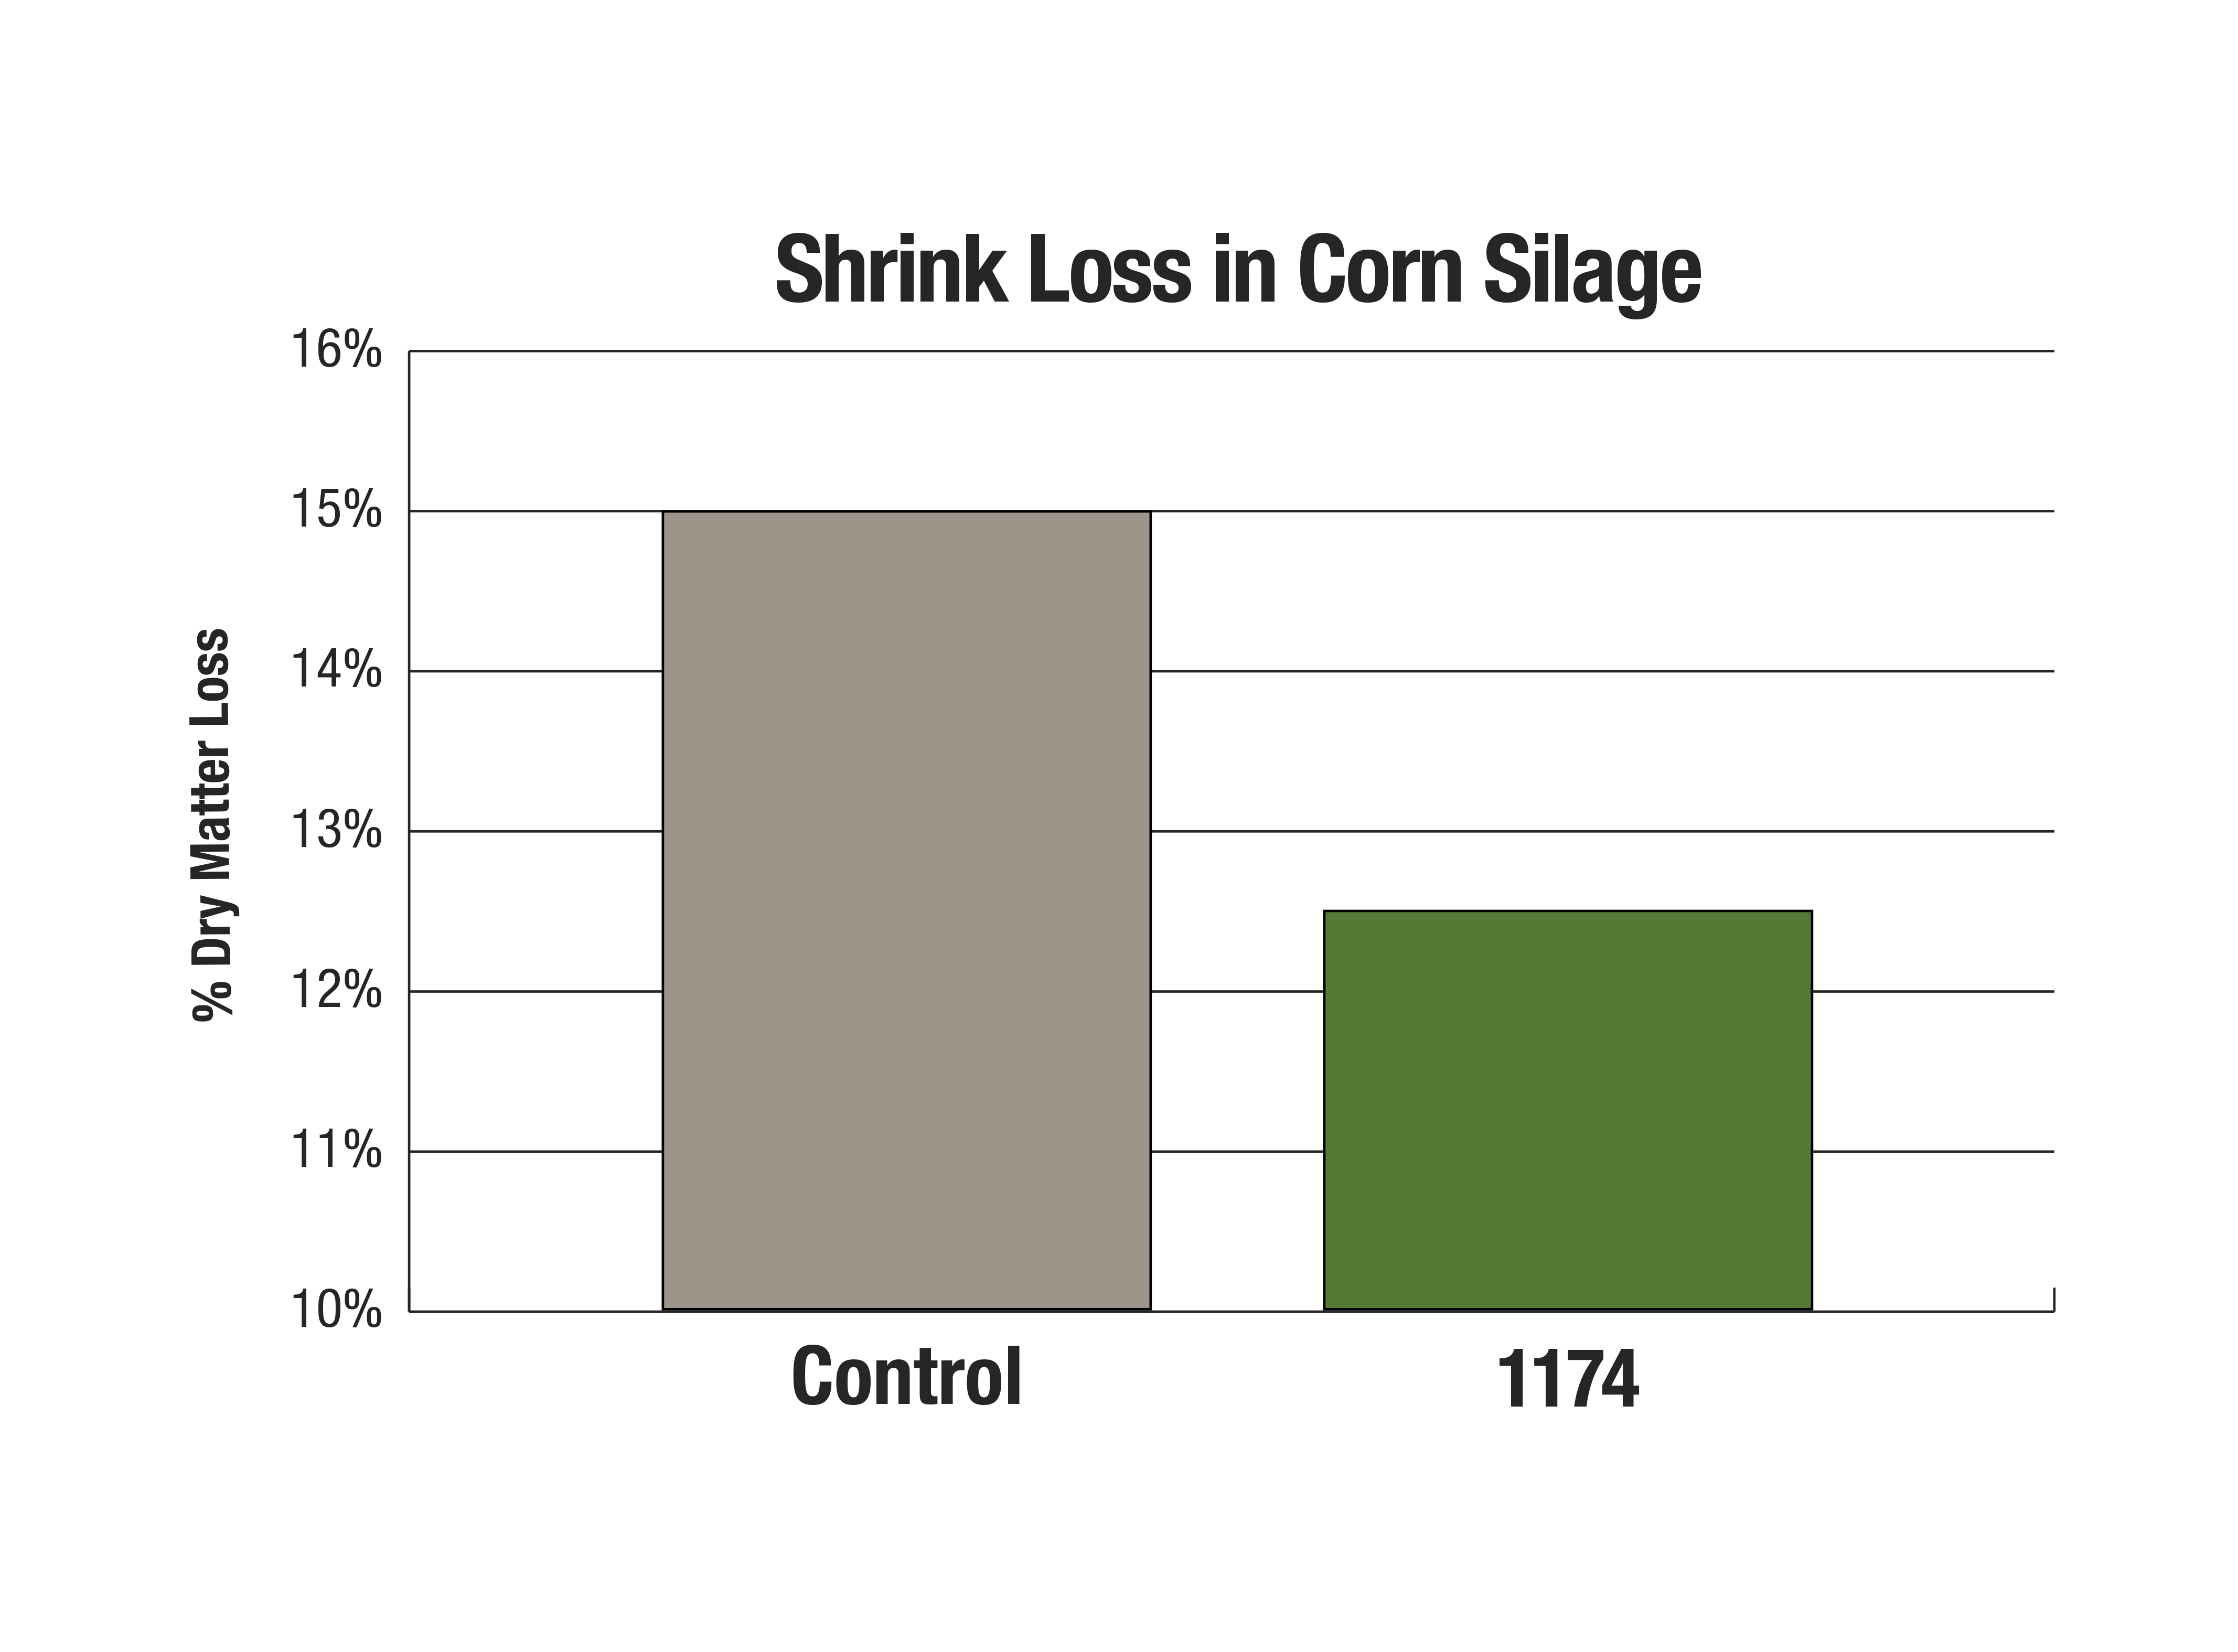 Shrink loss in corn silage